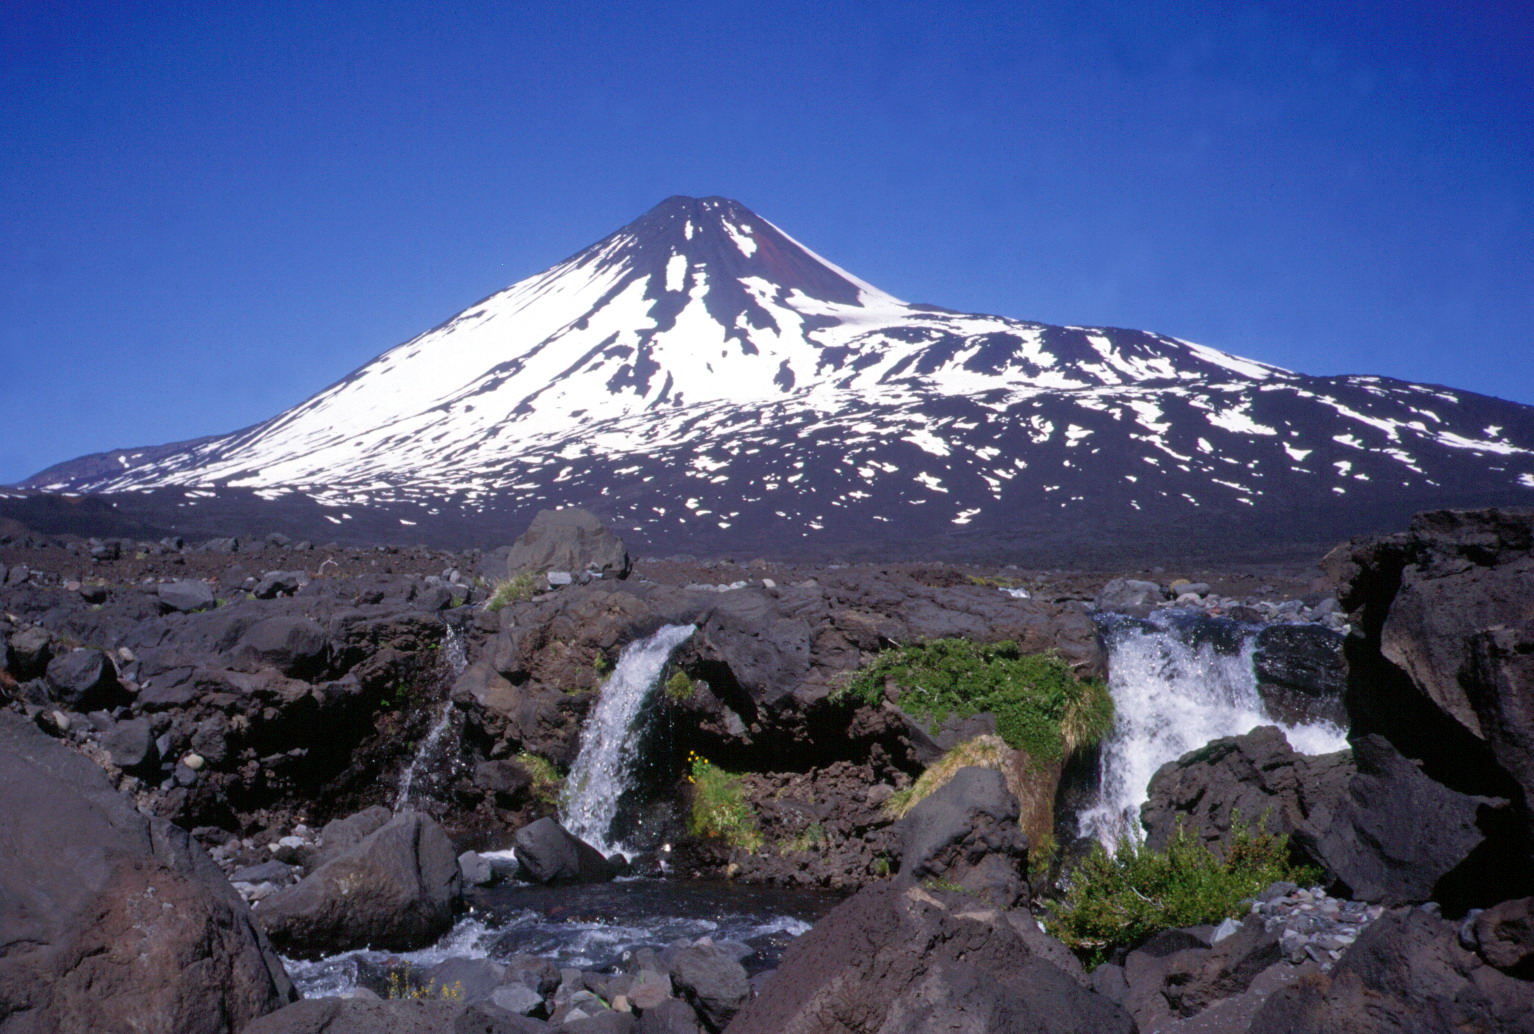 Volcán Antuco | Jespinos | Wikimedia